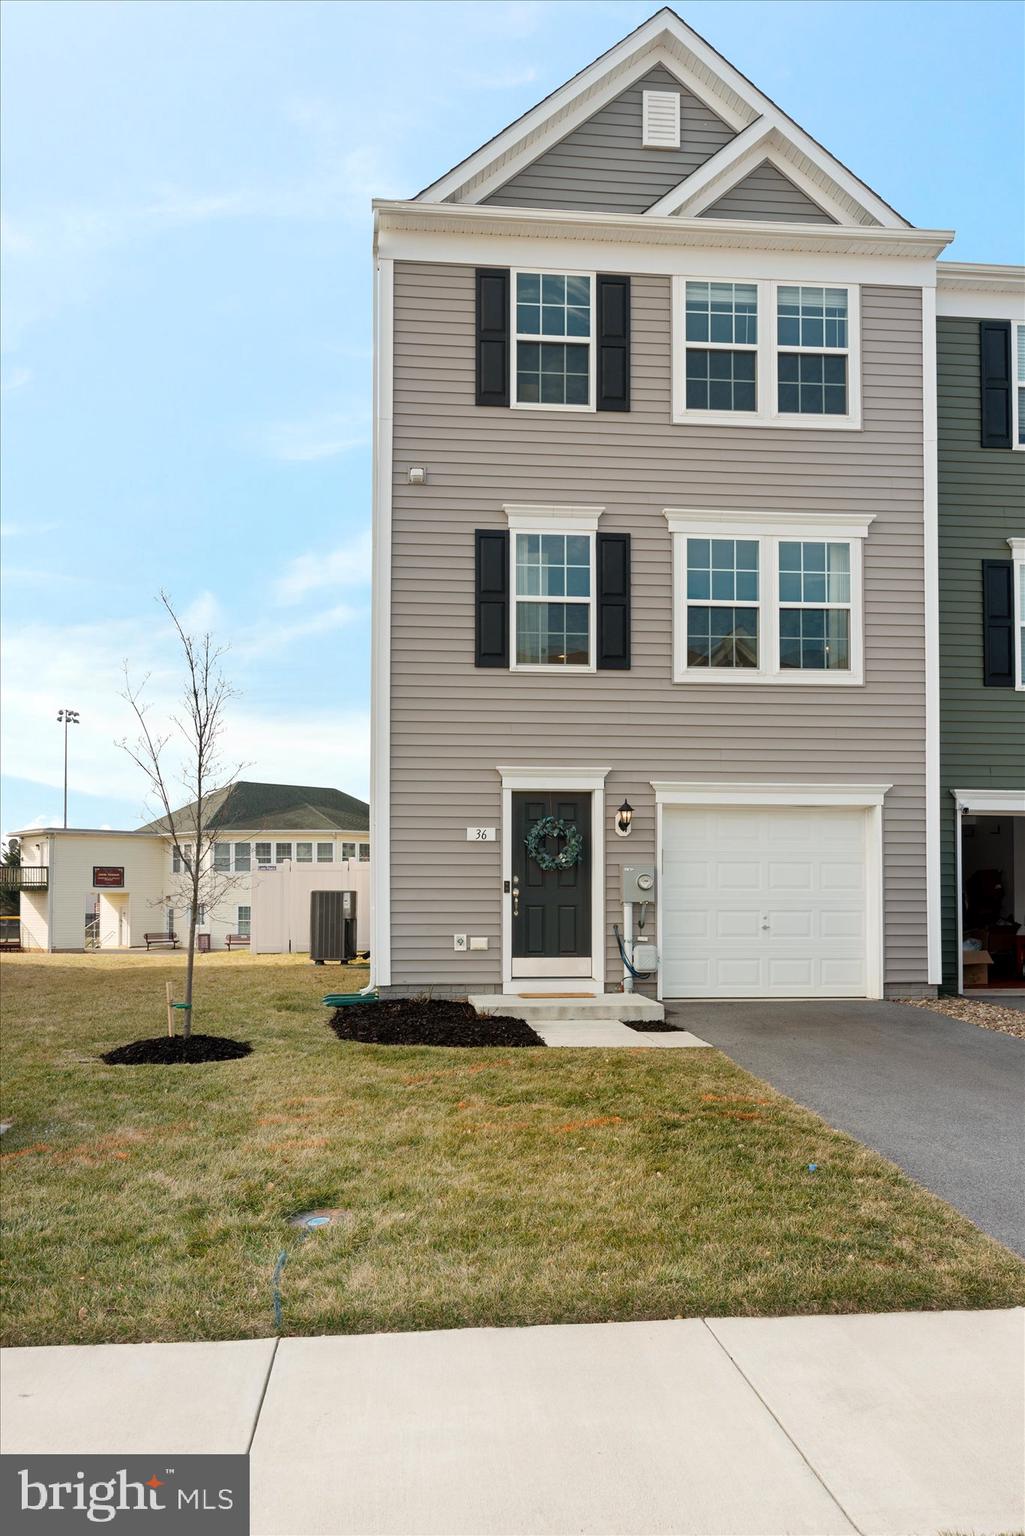 Immaculately maintained 3 level end unit townhome with one car garage in Briar Run Estates. The owne